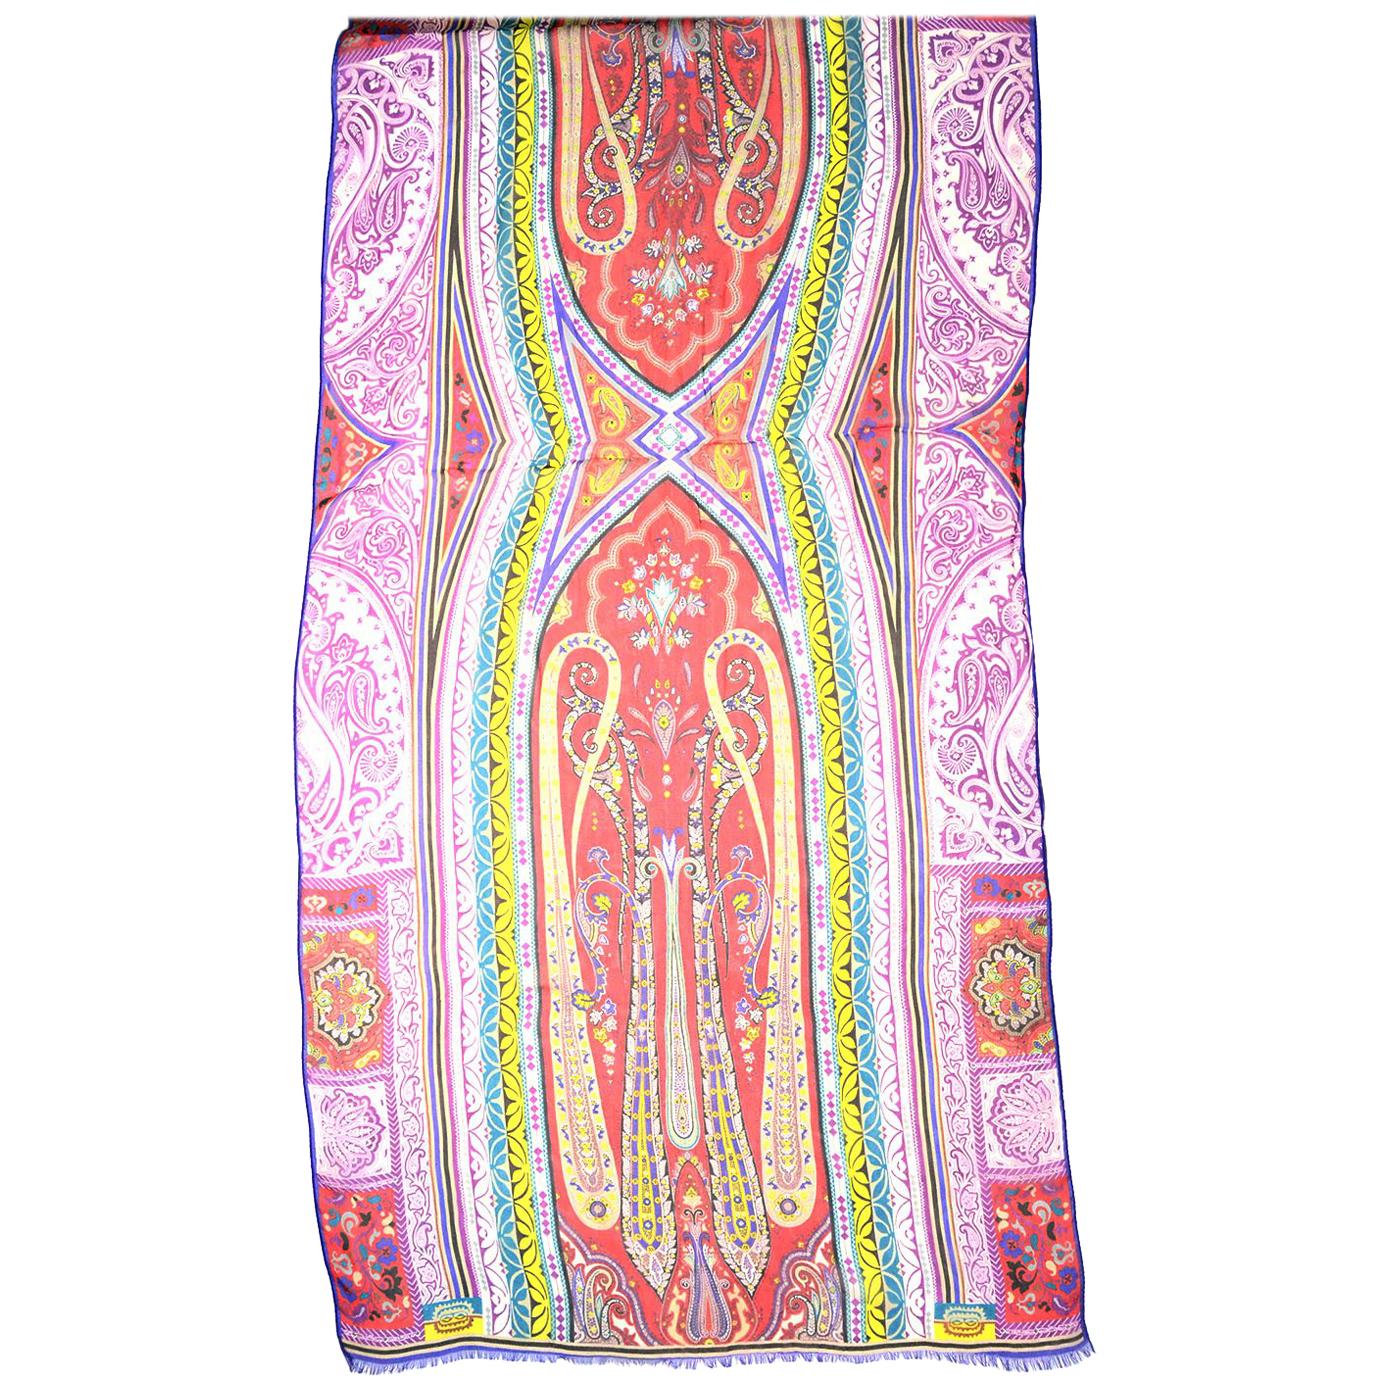 Etro Multi-Color Sheer Silk Paisley Print Scarf

Made In: Italy
Color: Multi-color
Materials: 100% silk
Overall Condition: Excellent pre-owned condition 

Measurements: 
64.5